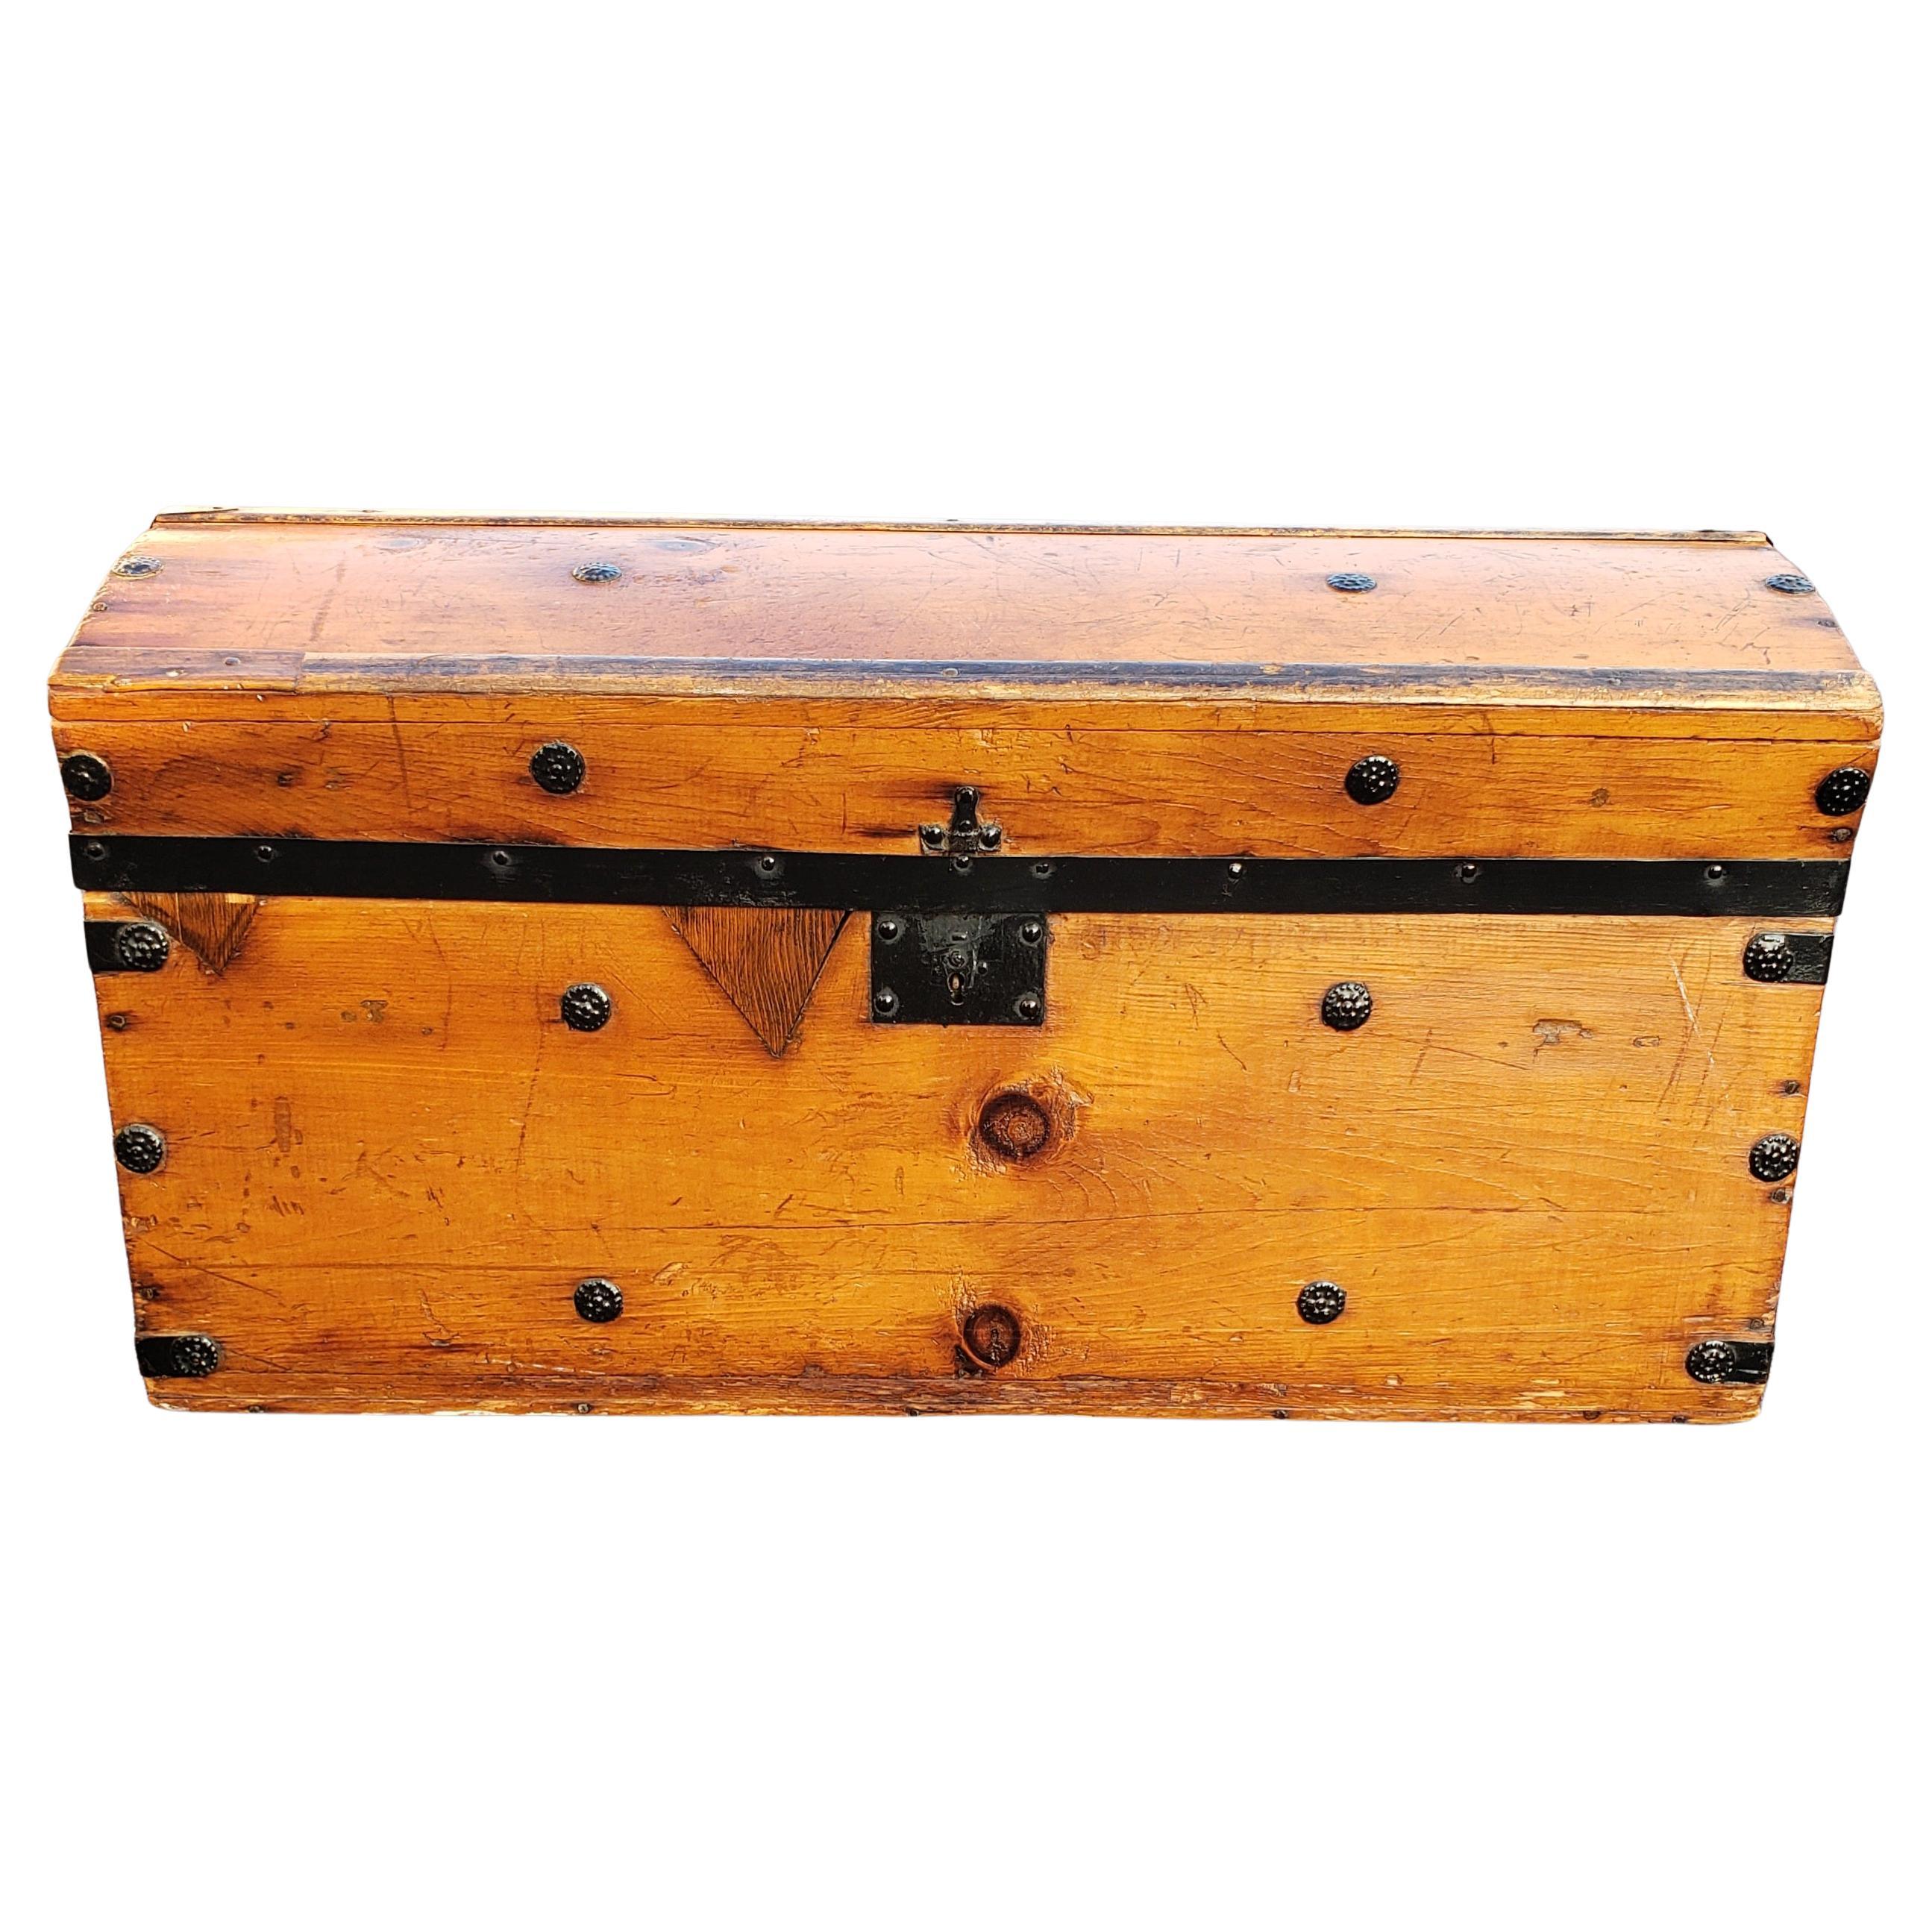 American Craftsman Vintage American Pine Trunk with Solid Wooden Handles, circa 1960s For Sale